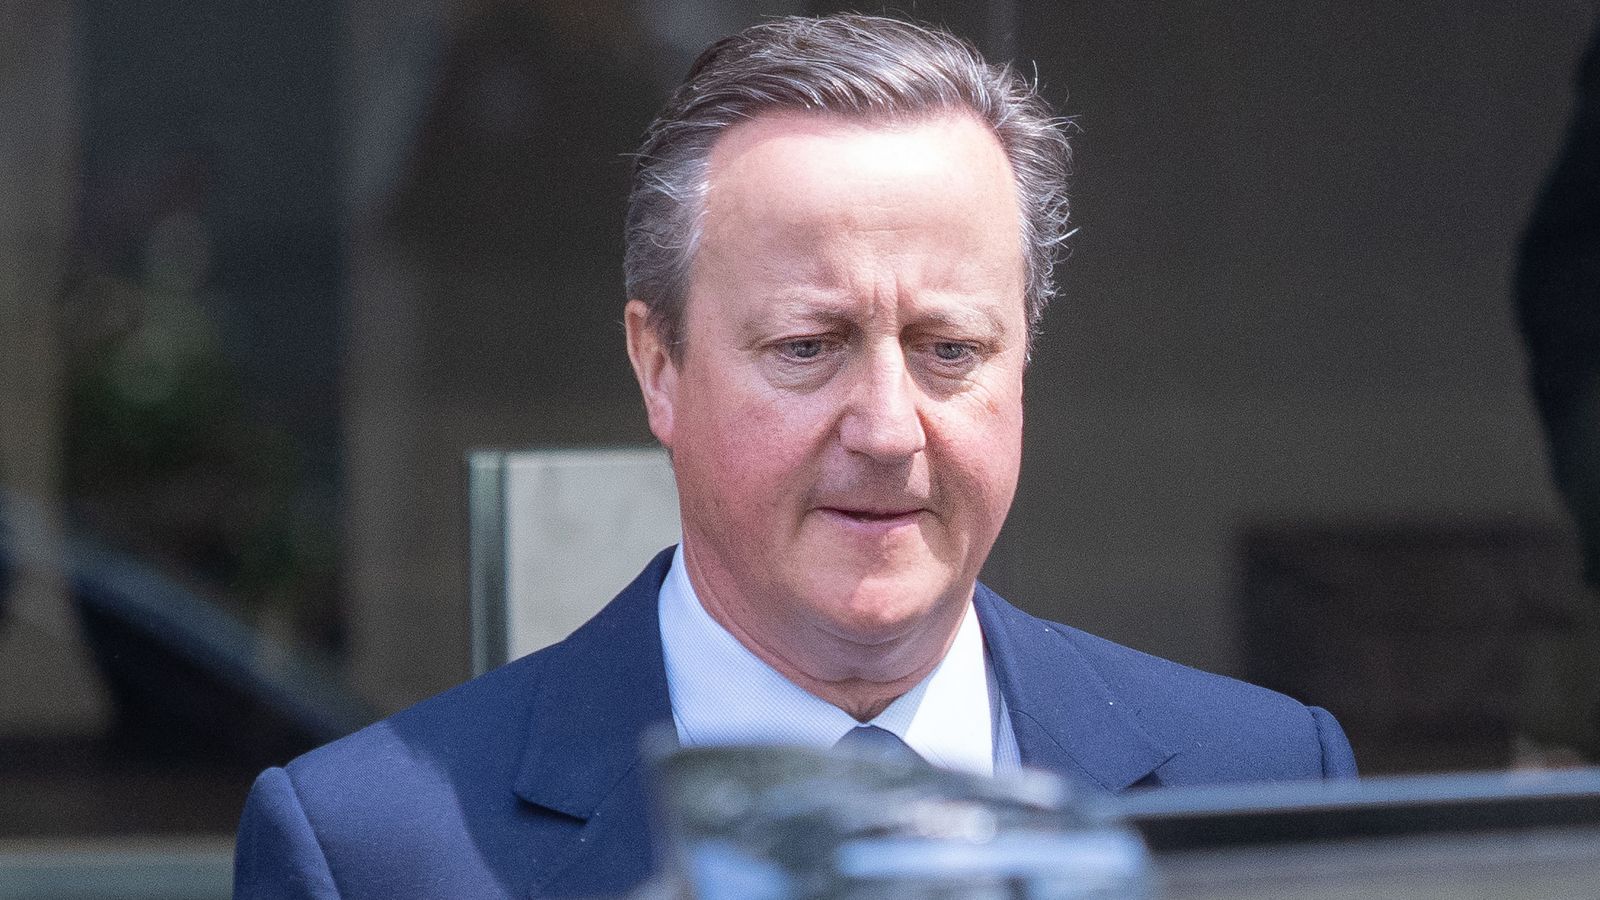 David Cameron heckled as he leaves COVID inquiry